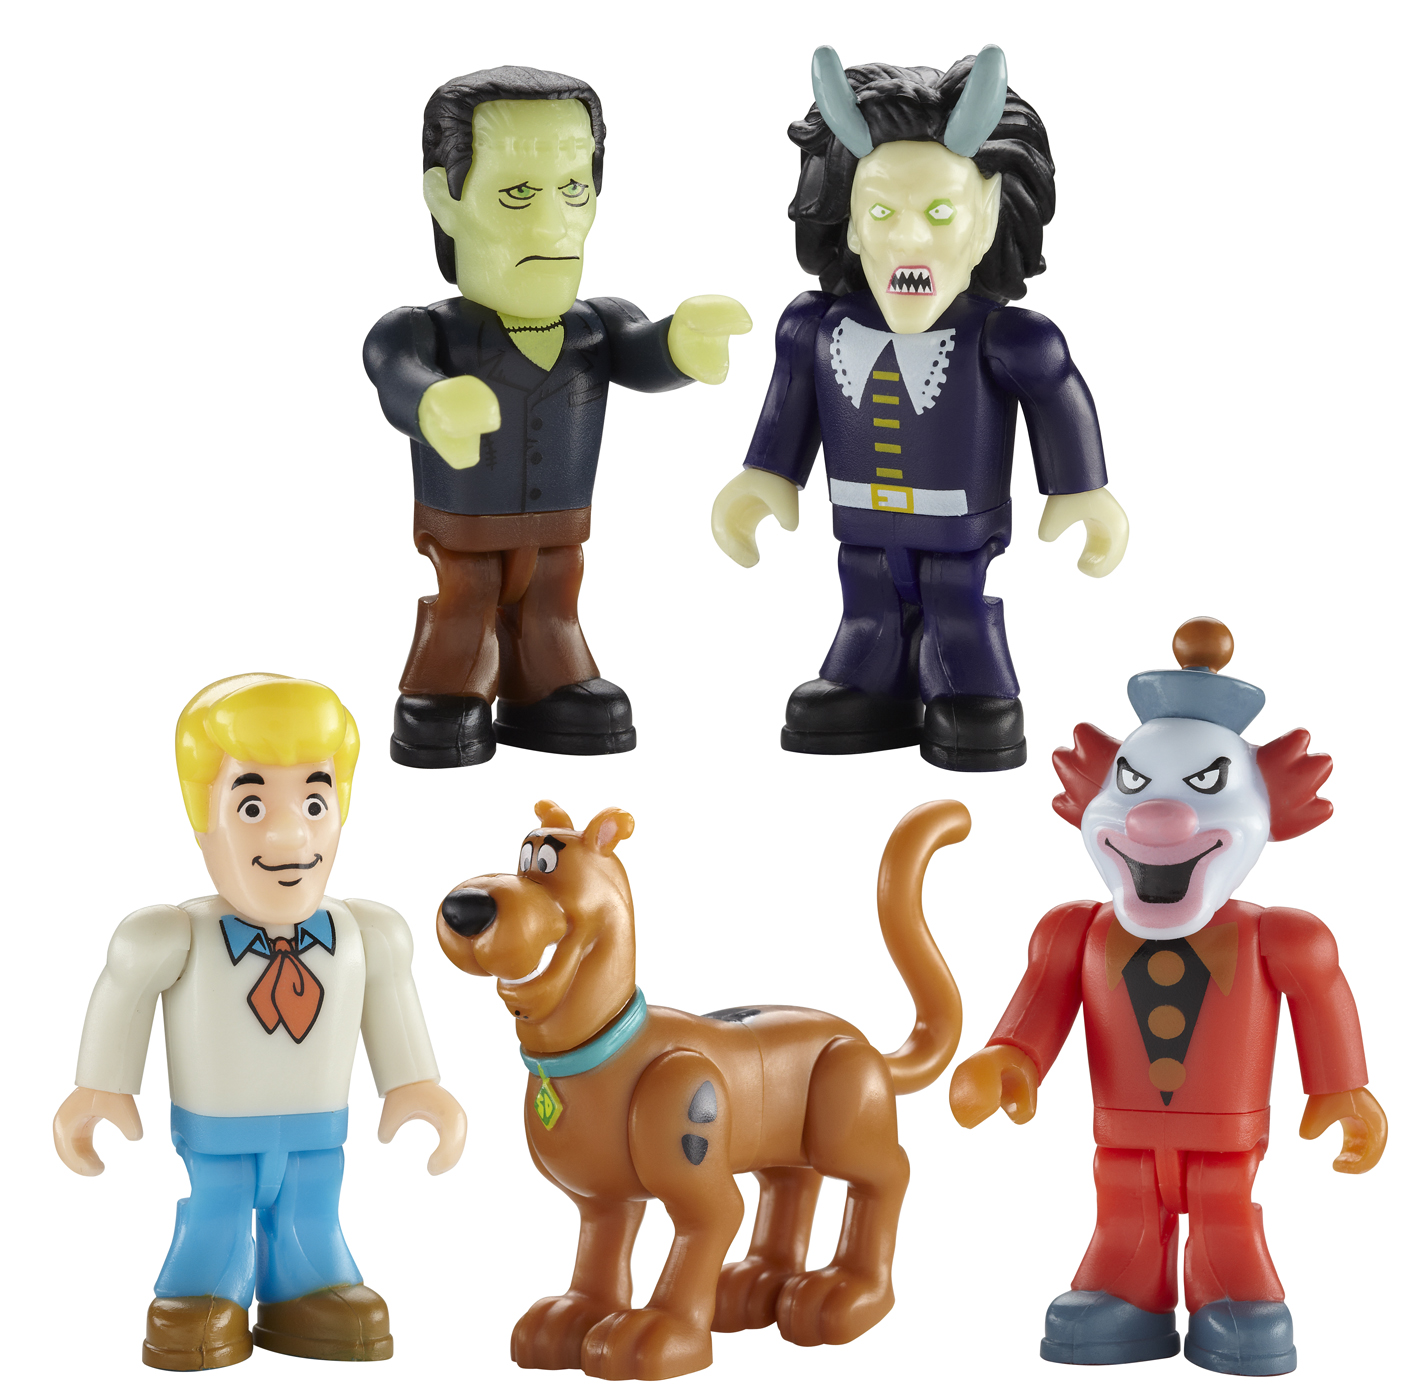 Scooby Doo 5 Pack - Pack 2